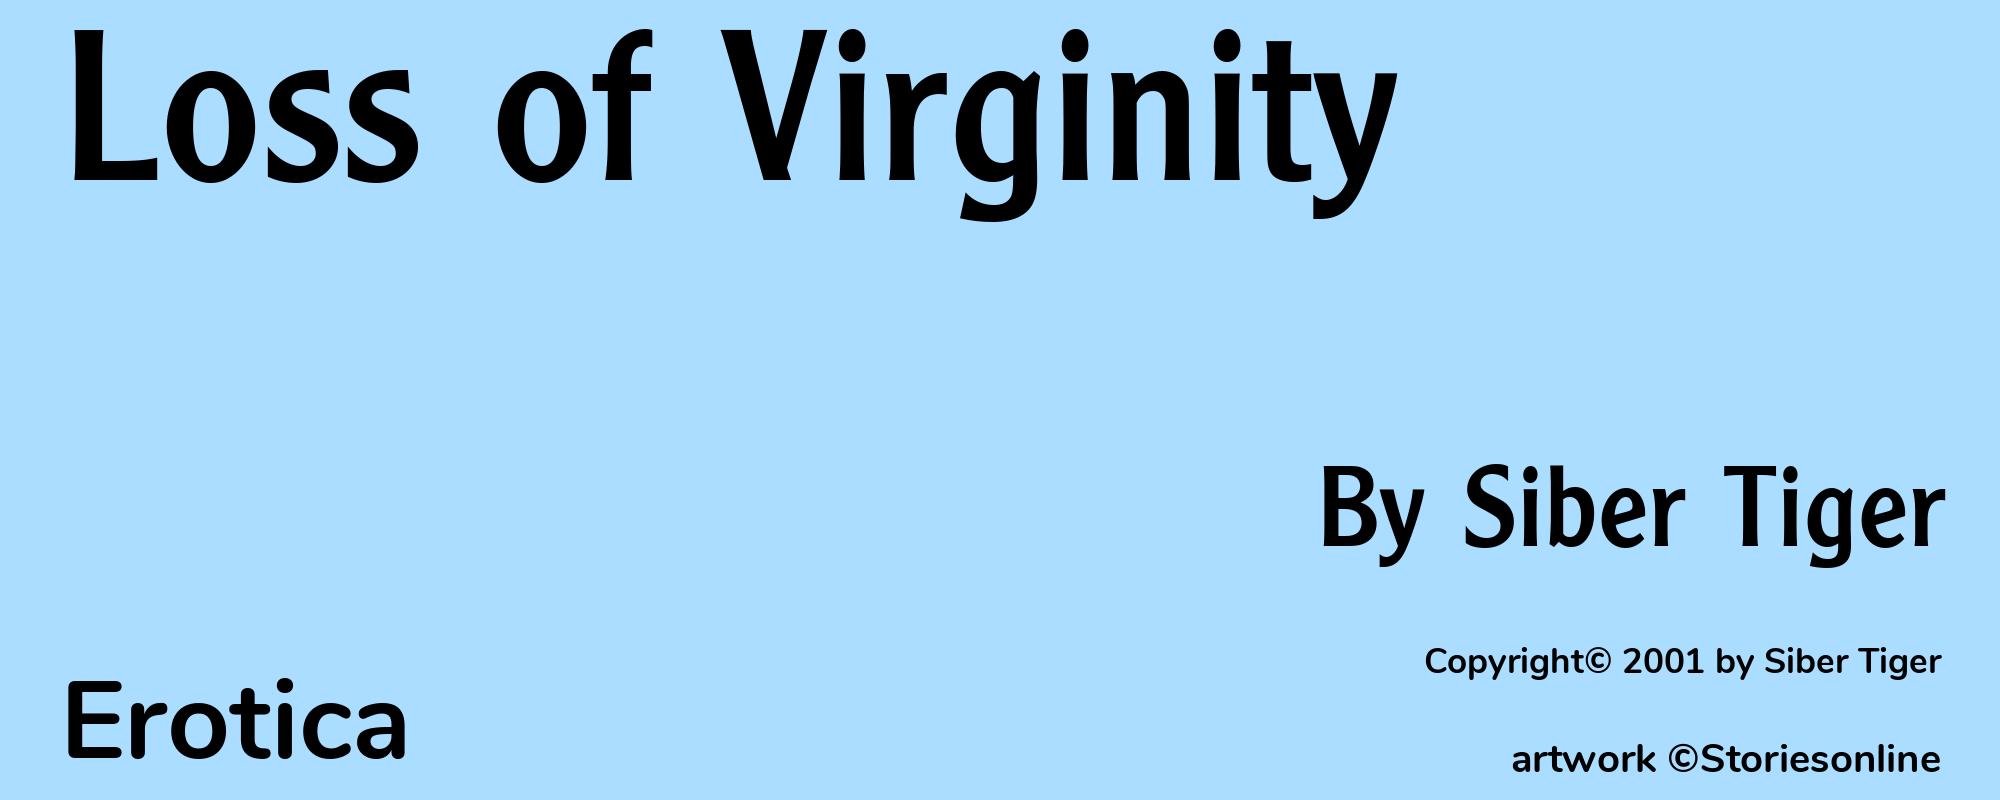 Loss of Virginity - Cover